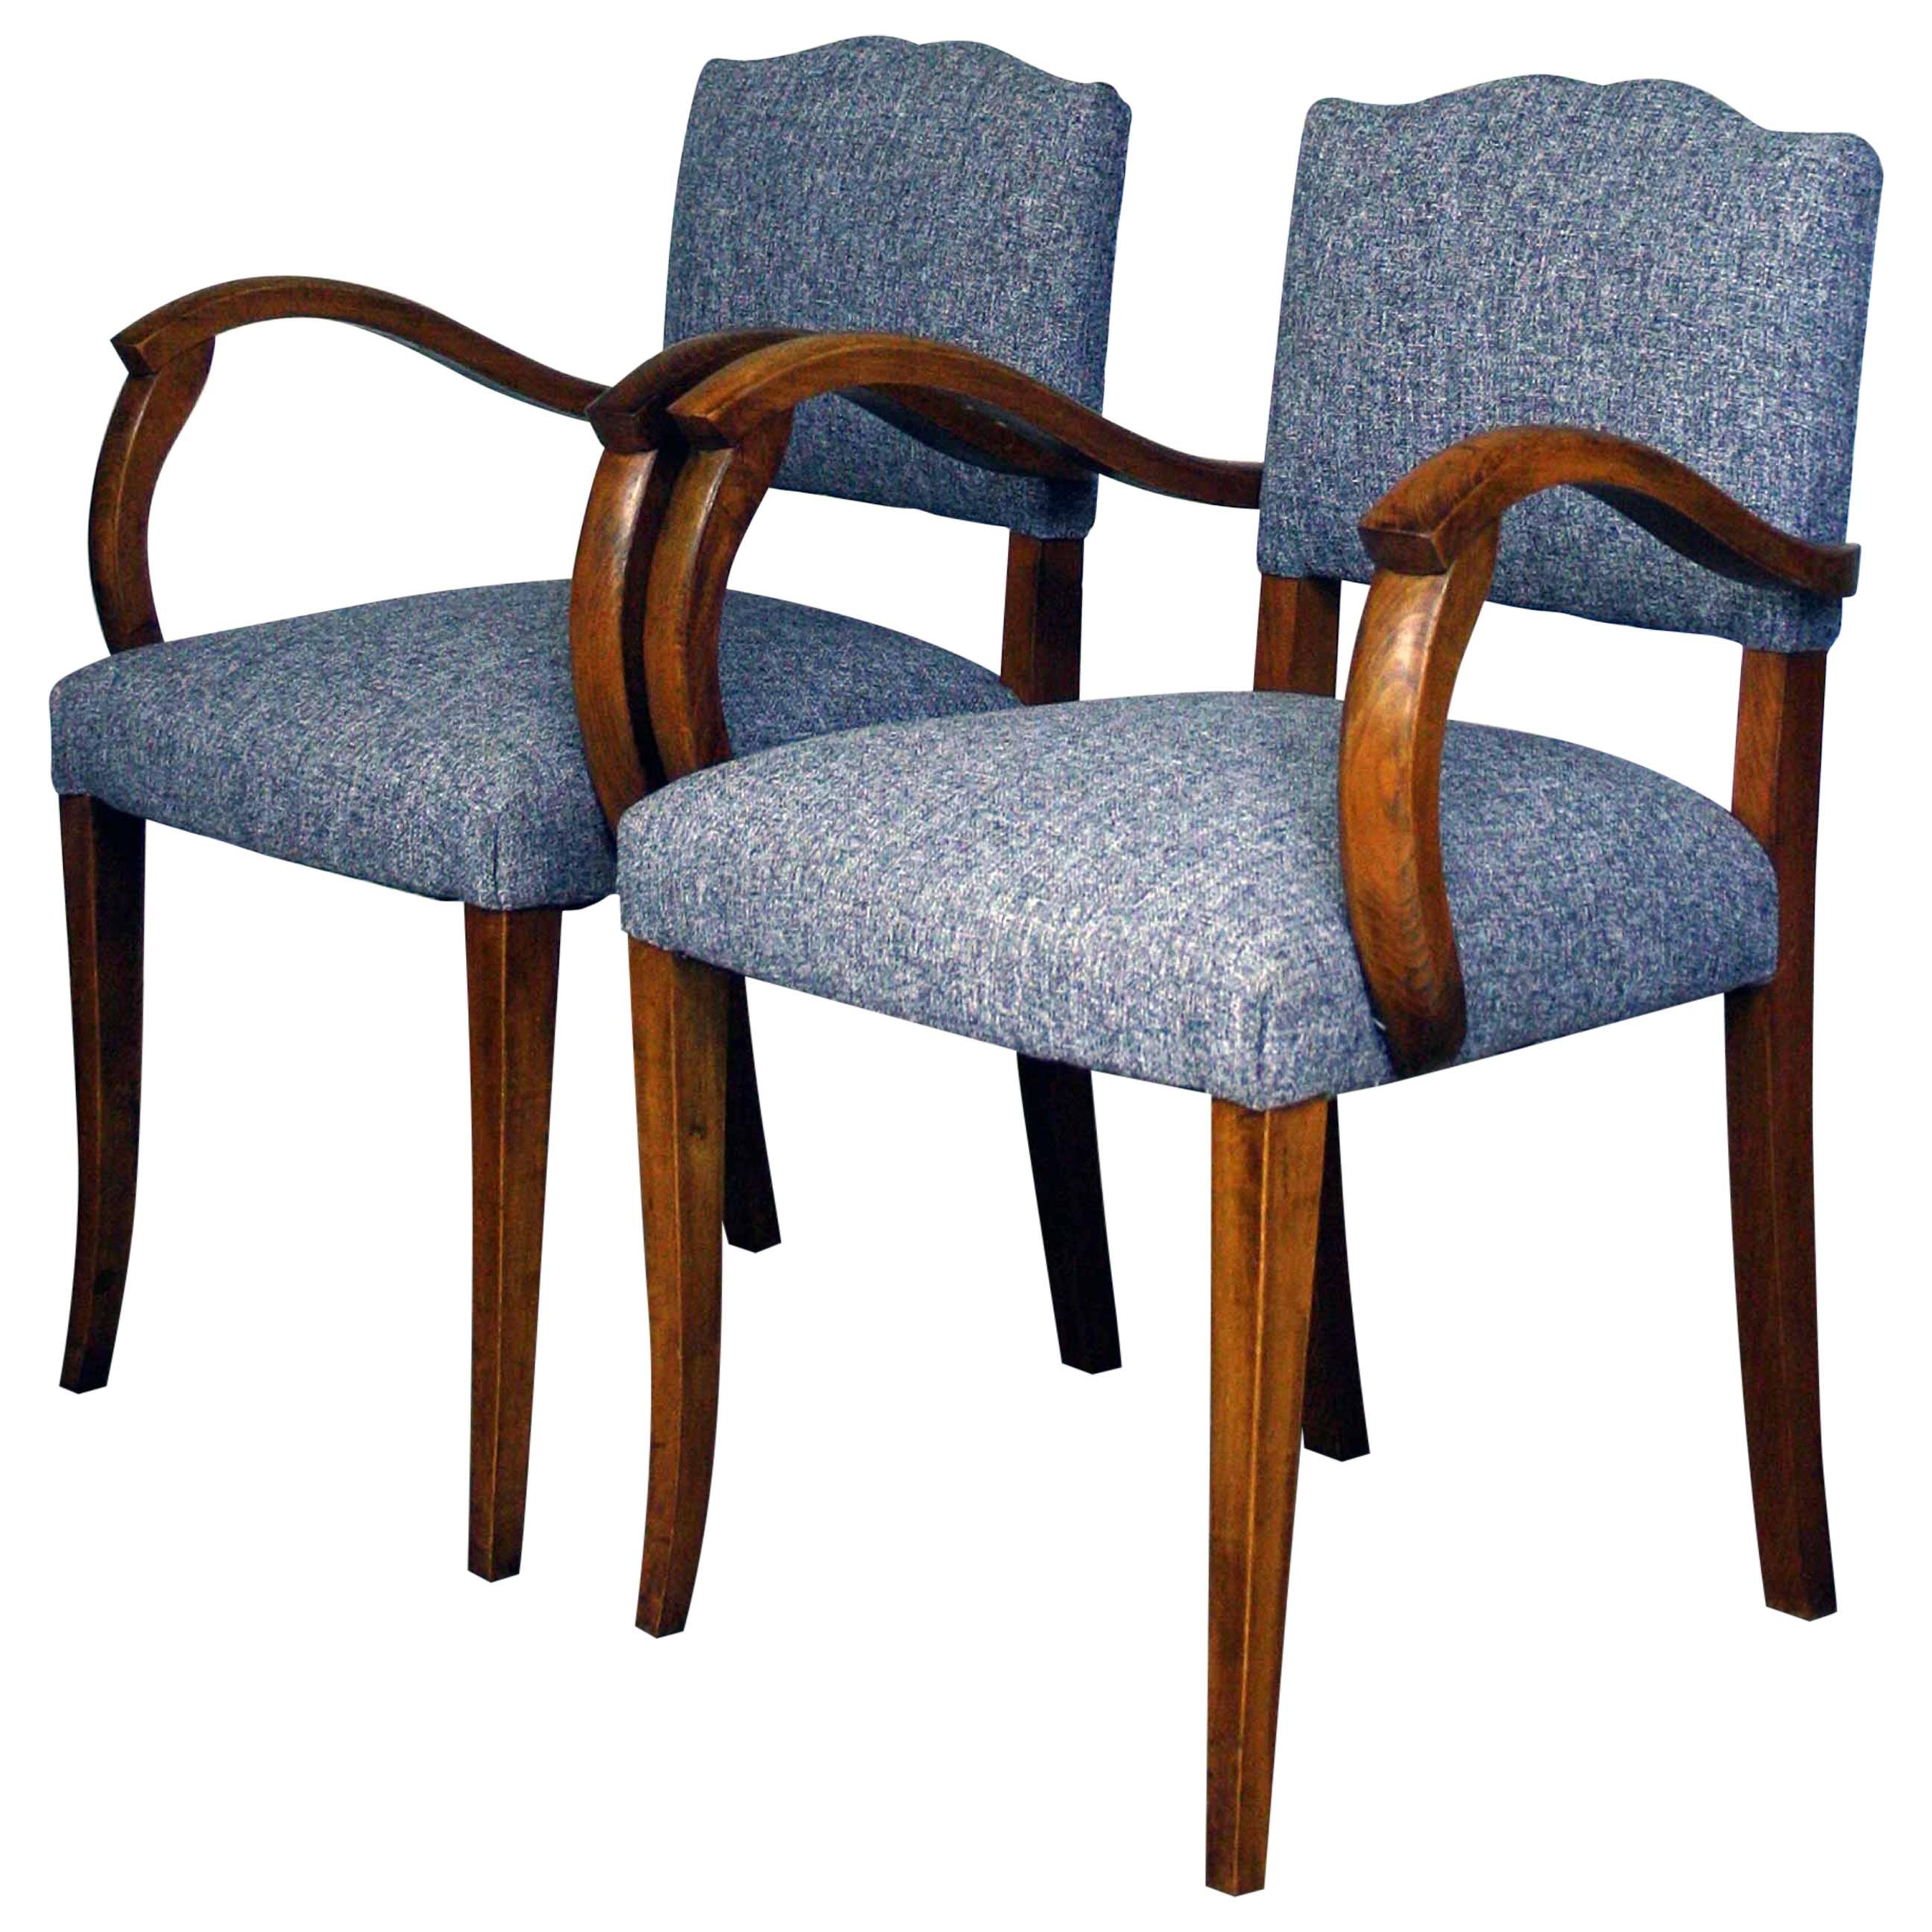 1950s Reupholstered Moustache Back Bridge Chairs